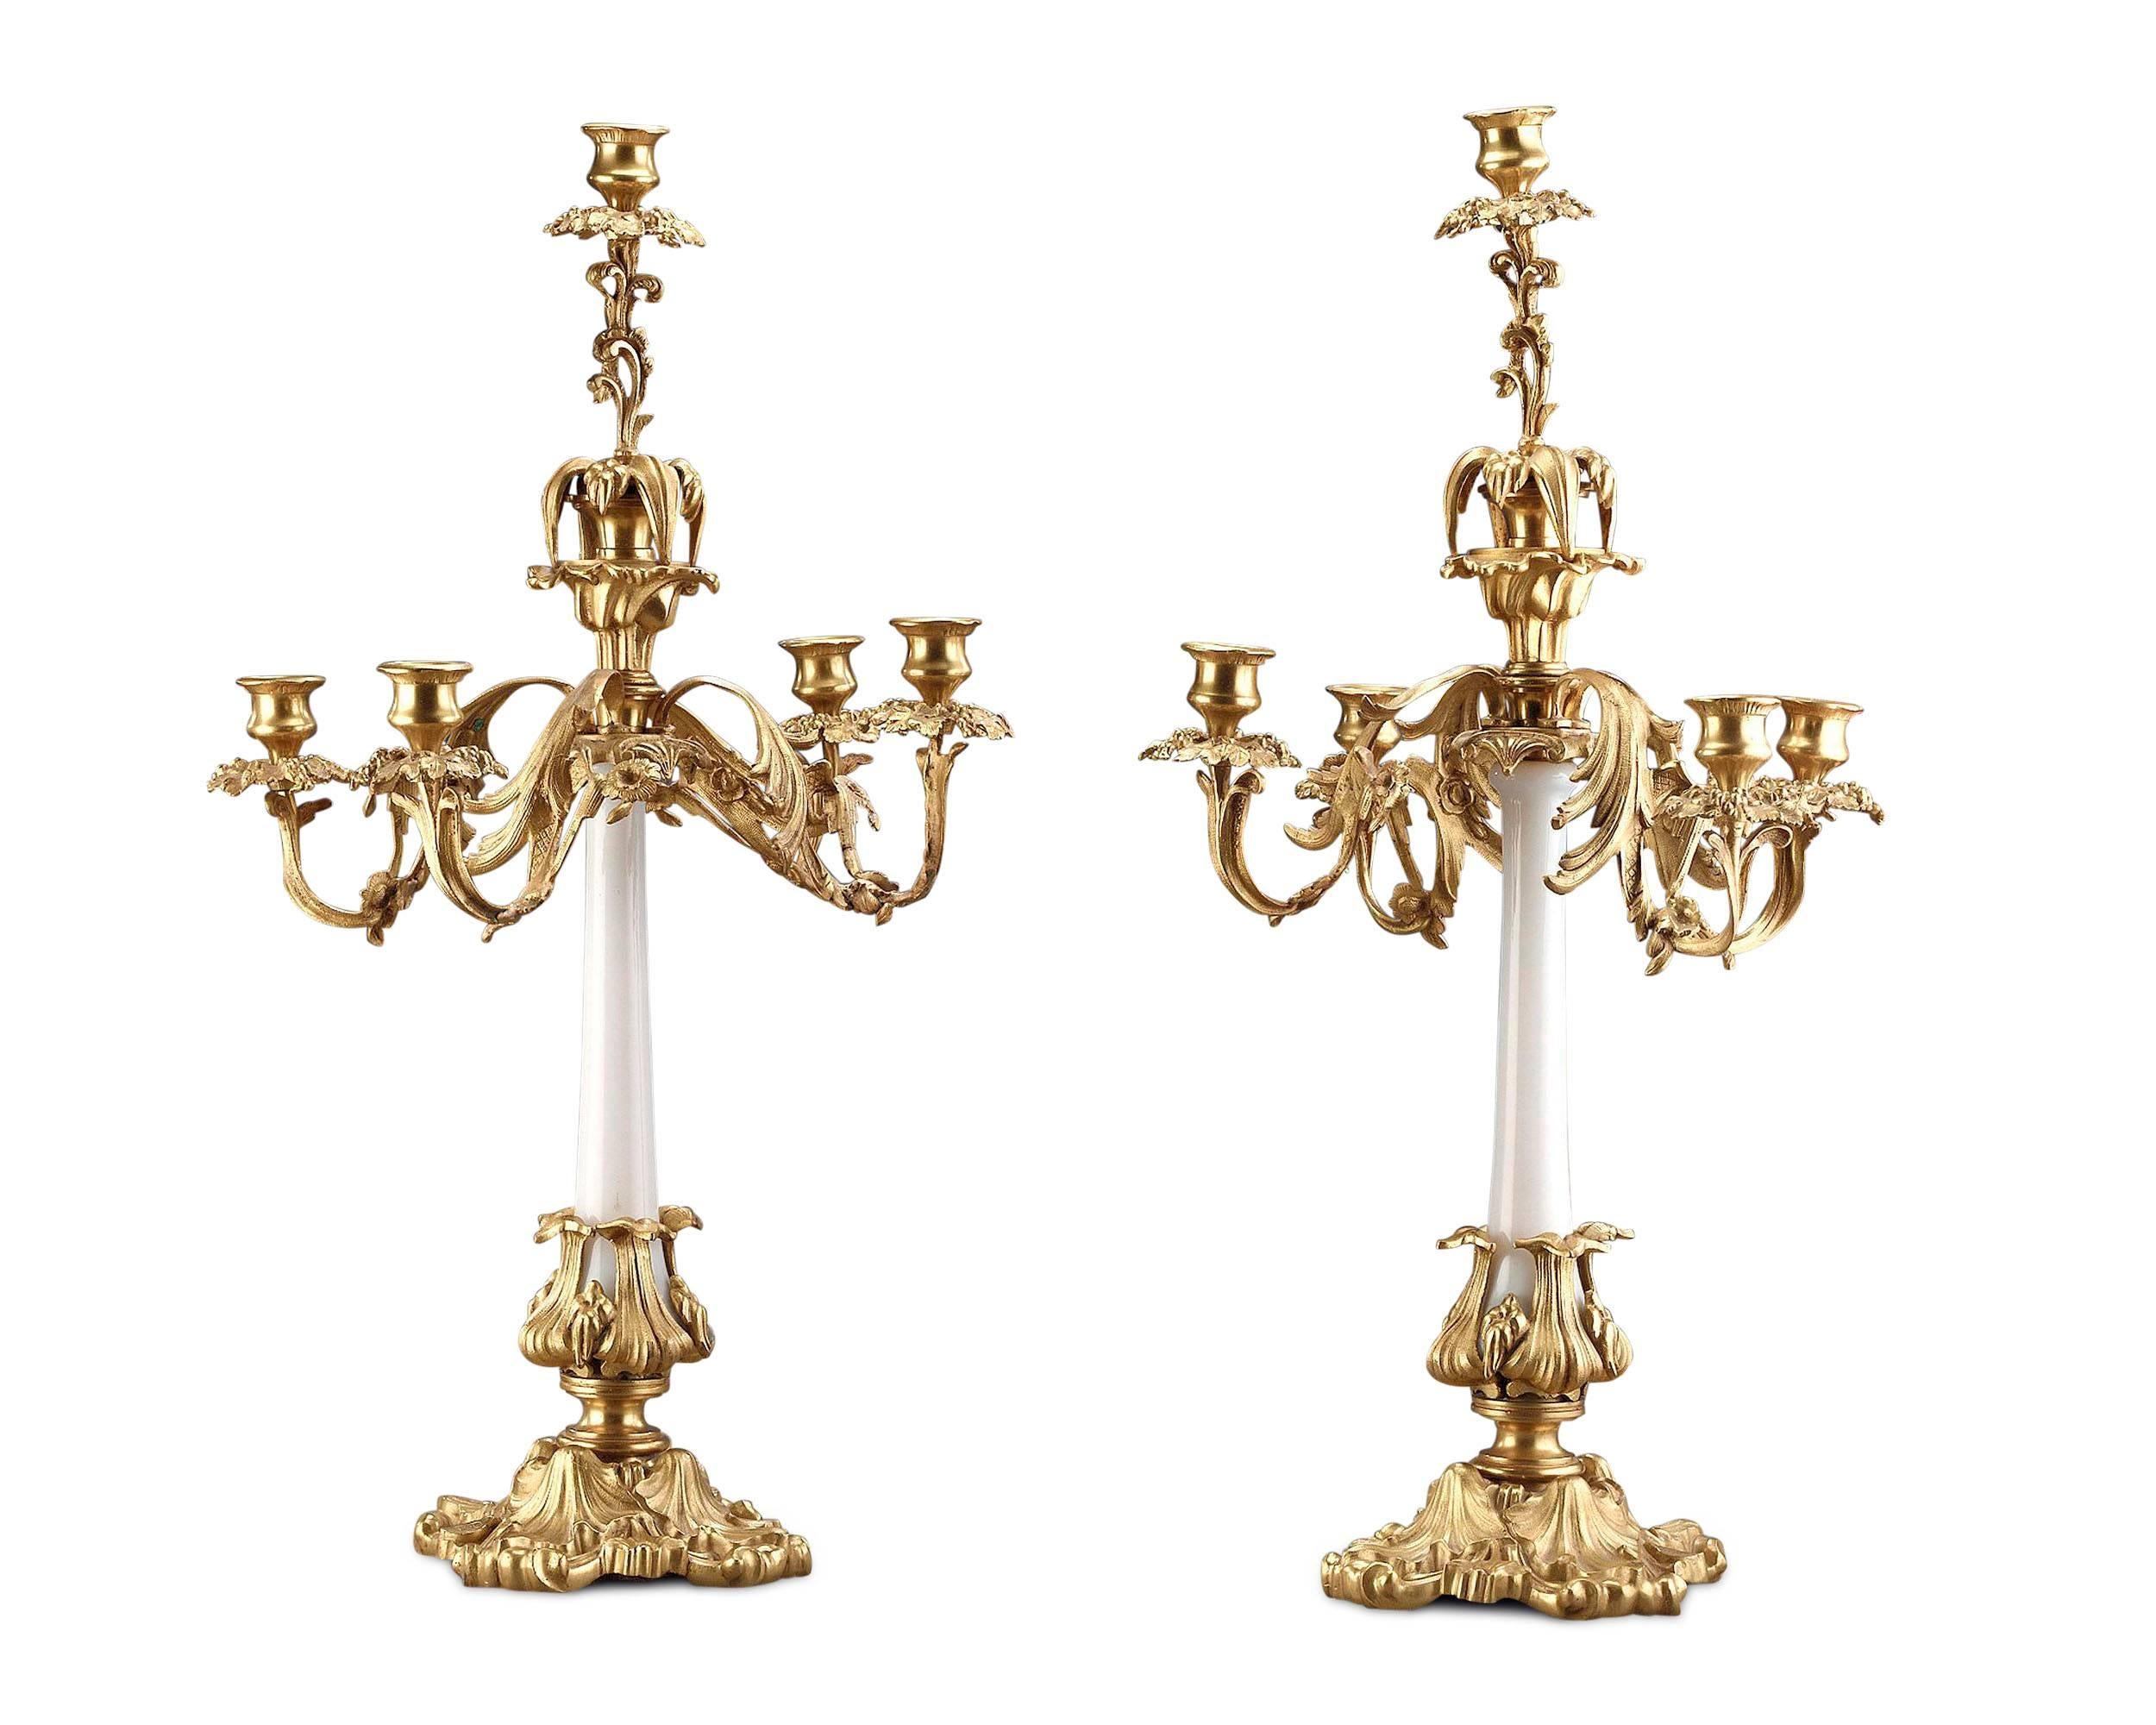 A lovely pair of French opaline glass candelabra beautifully mounted in gilded bronze.

circa 1870.